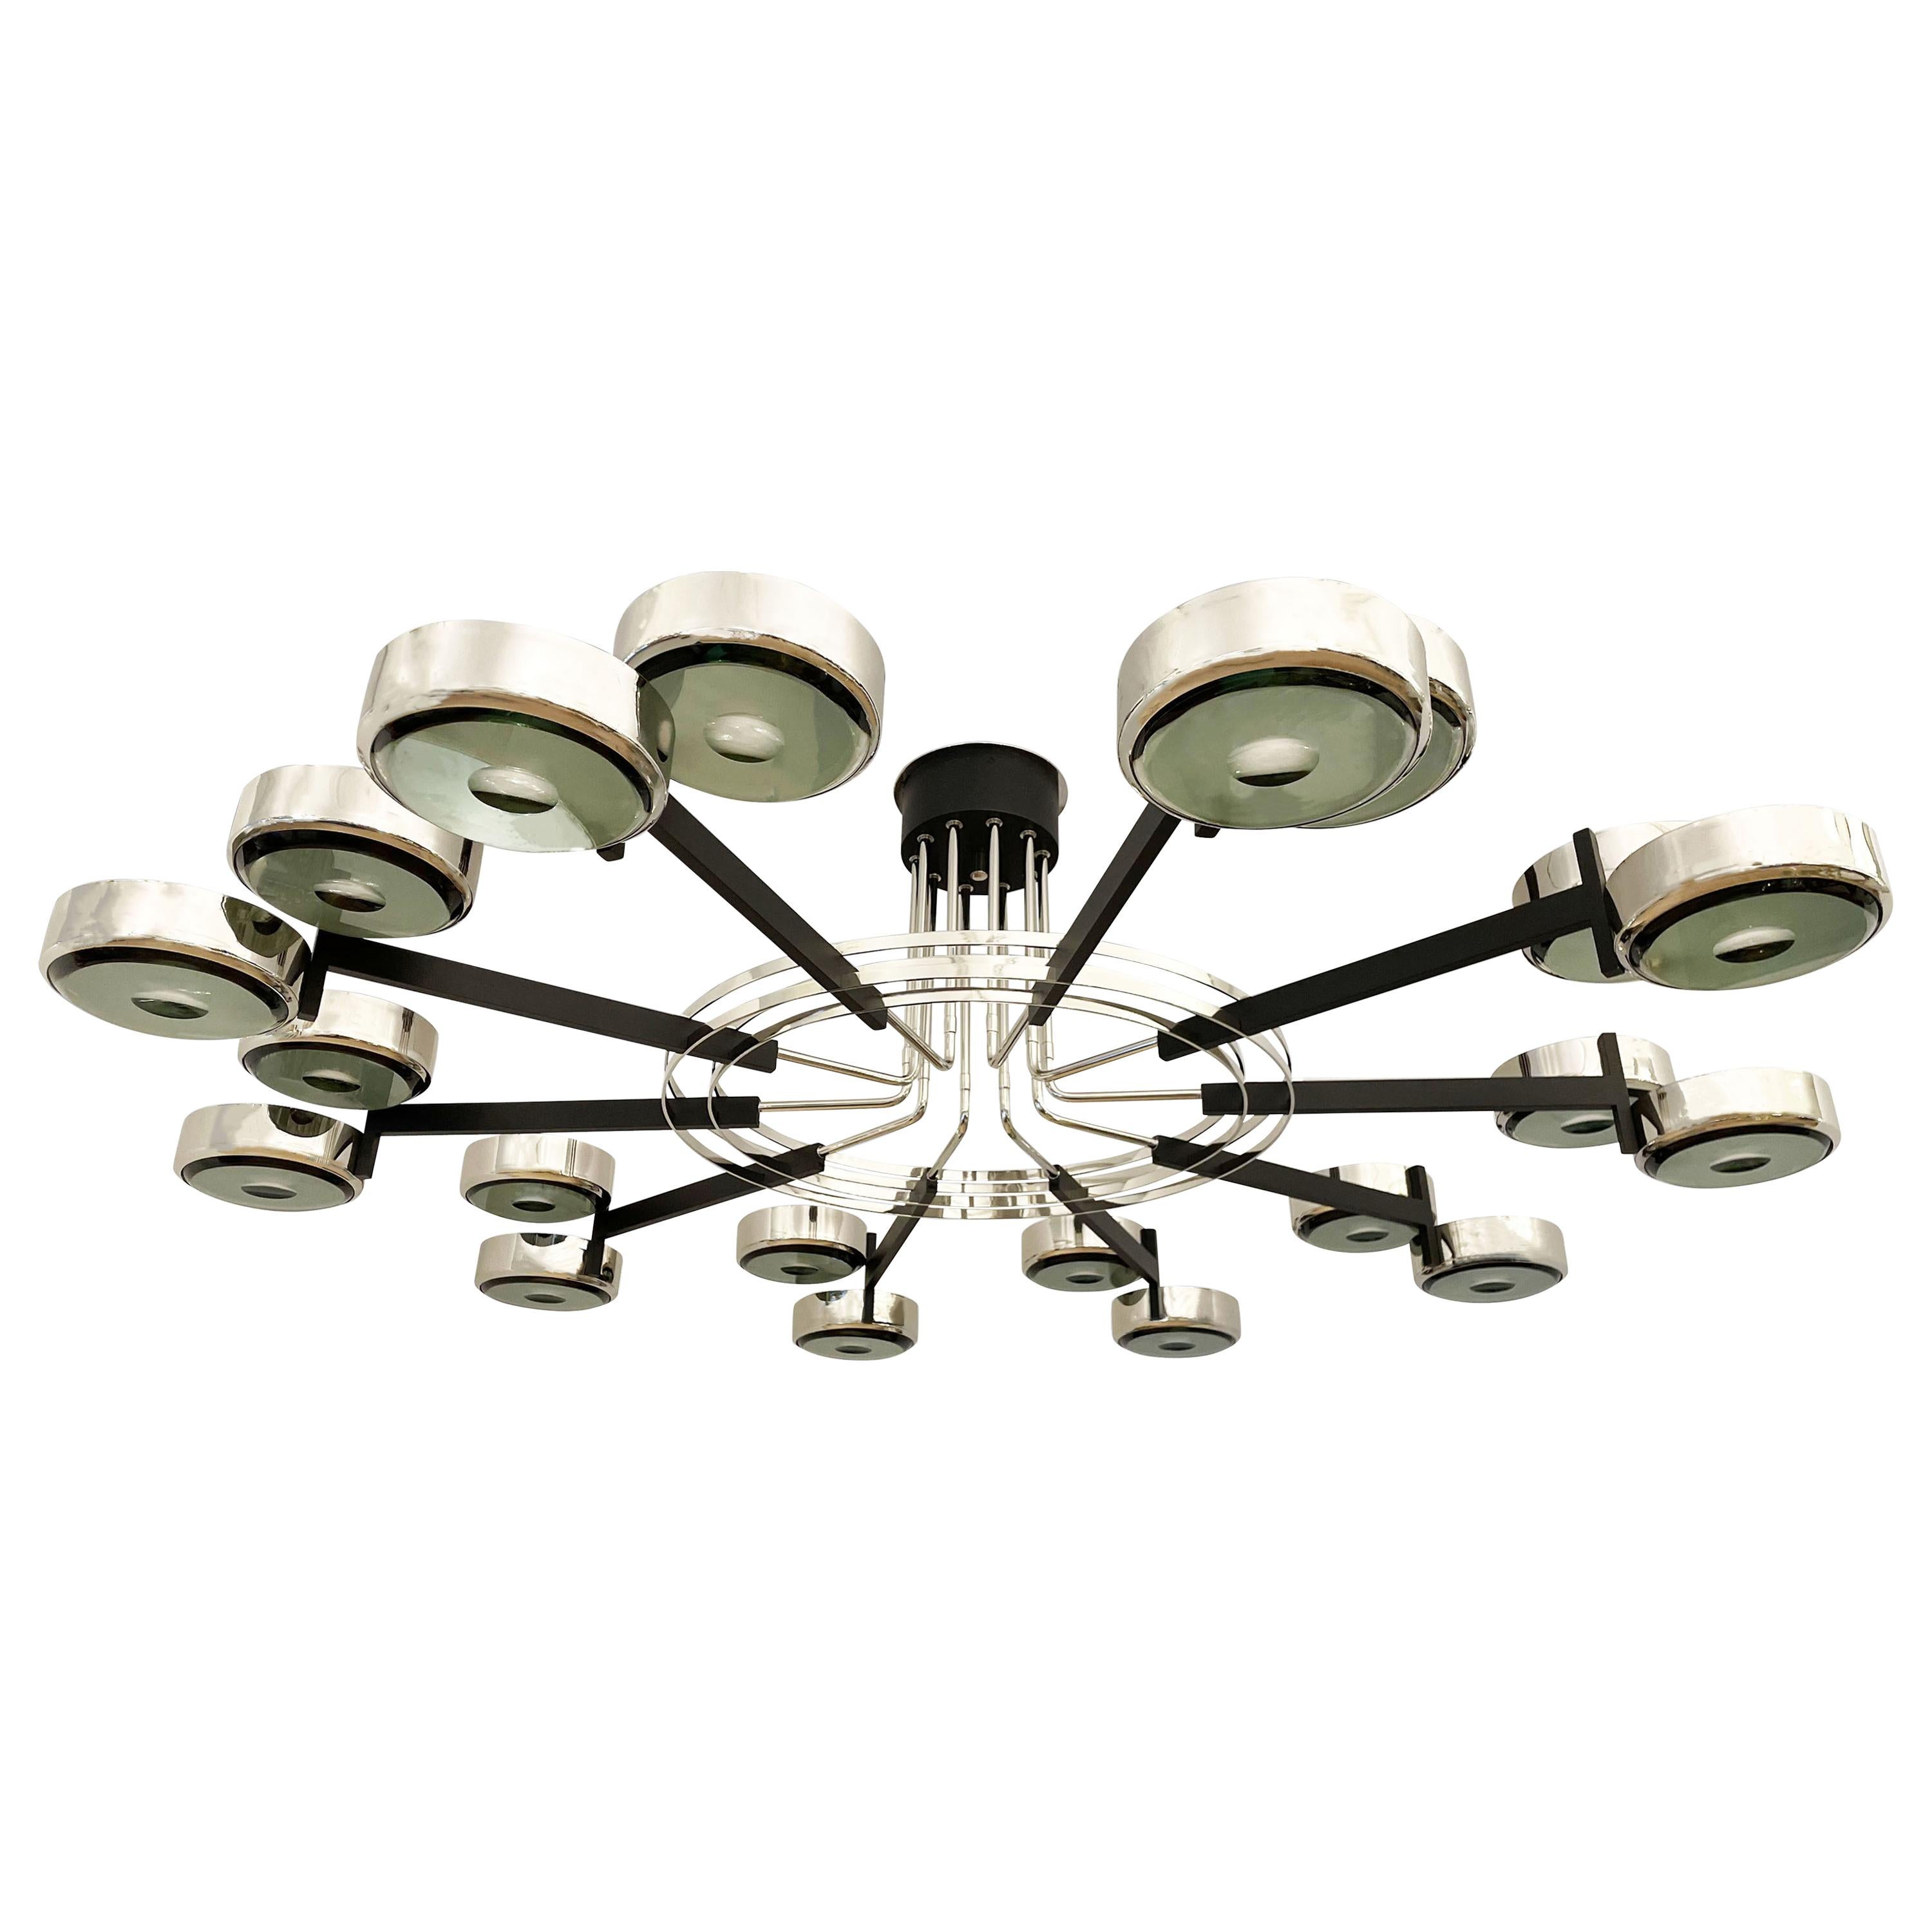 Eclissi N.20 Ceiling Light by Gaspare Asaro